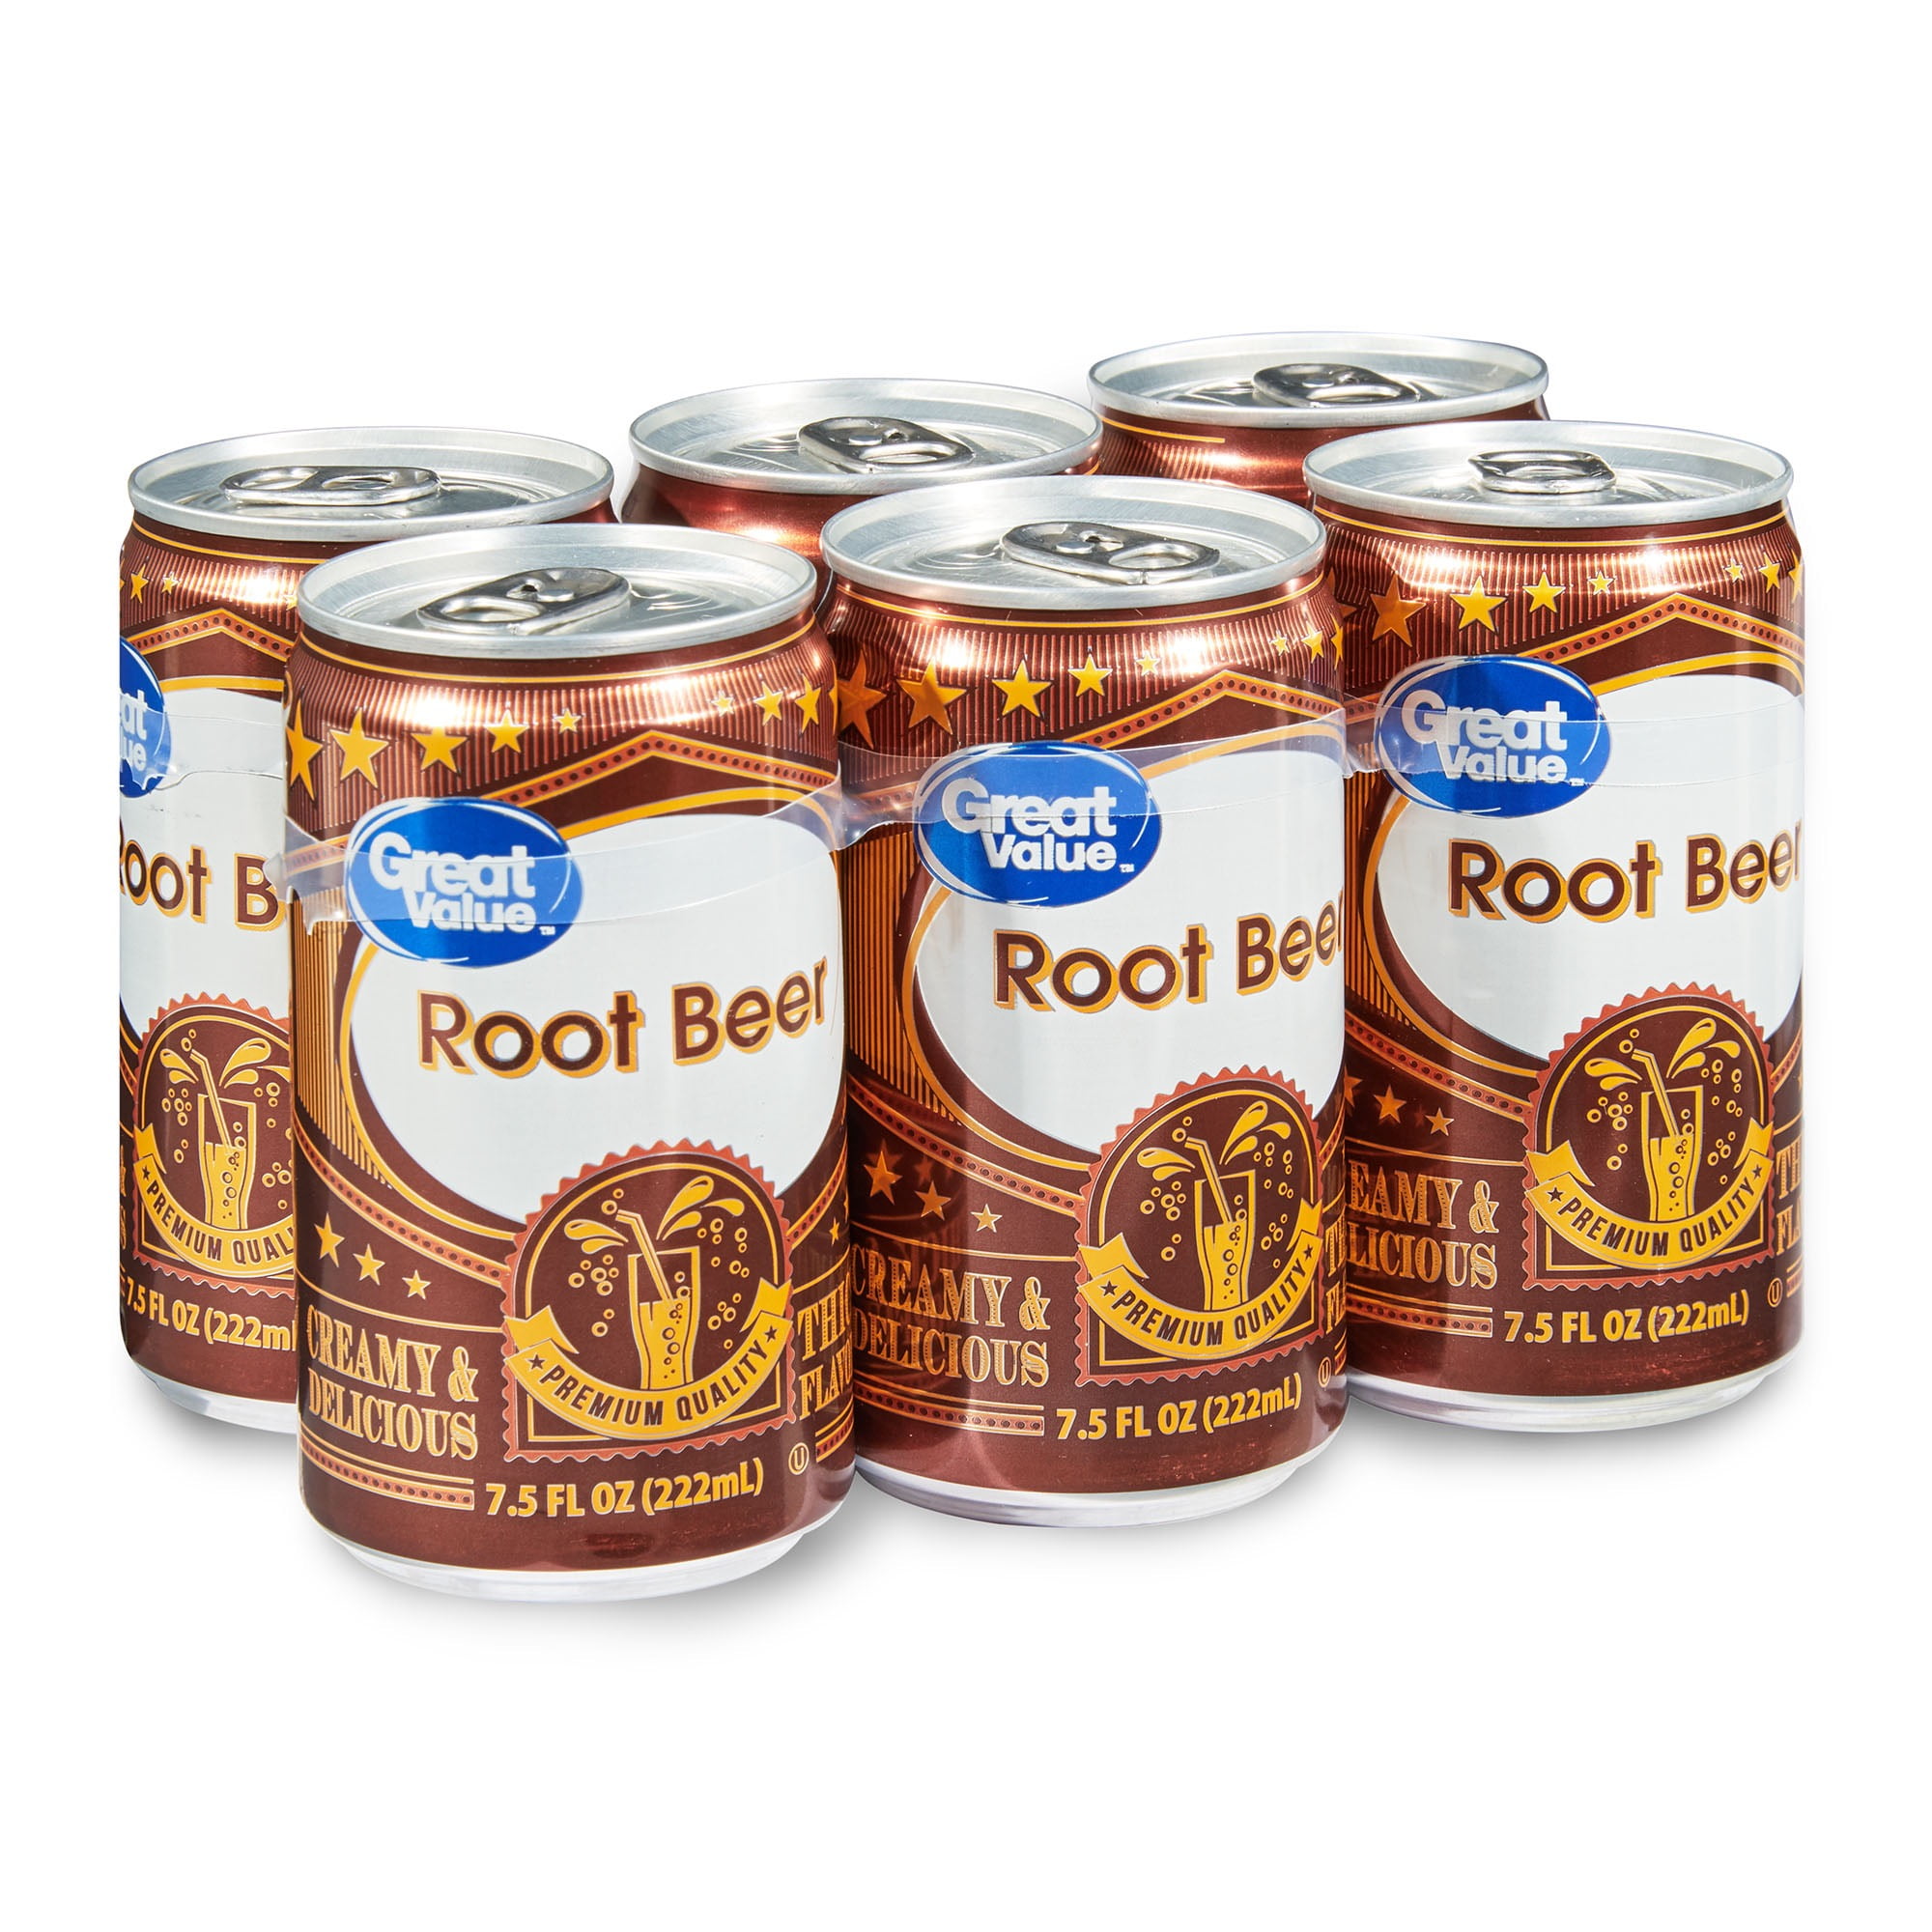 Great Value Root Beer Soda Pop, 7.5 fl oz, 6 Pack Cans